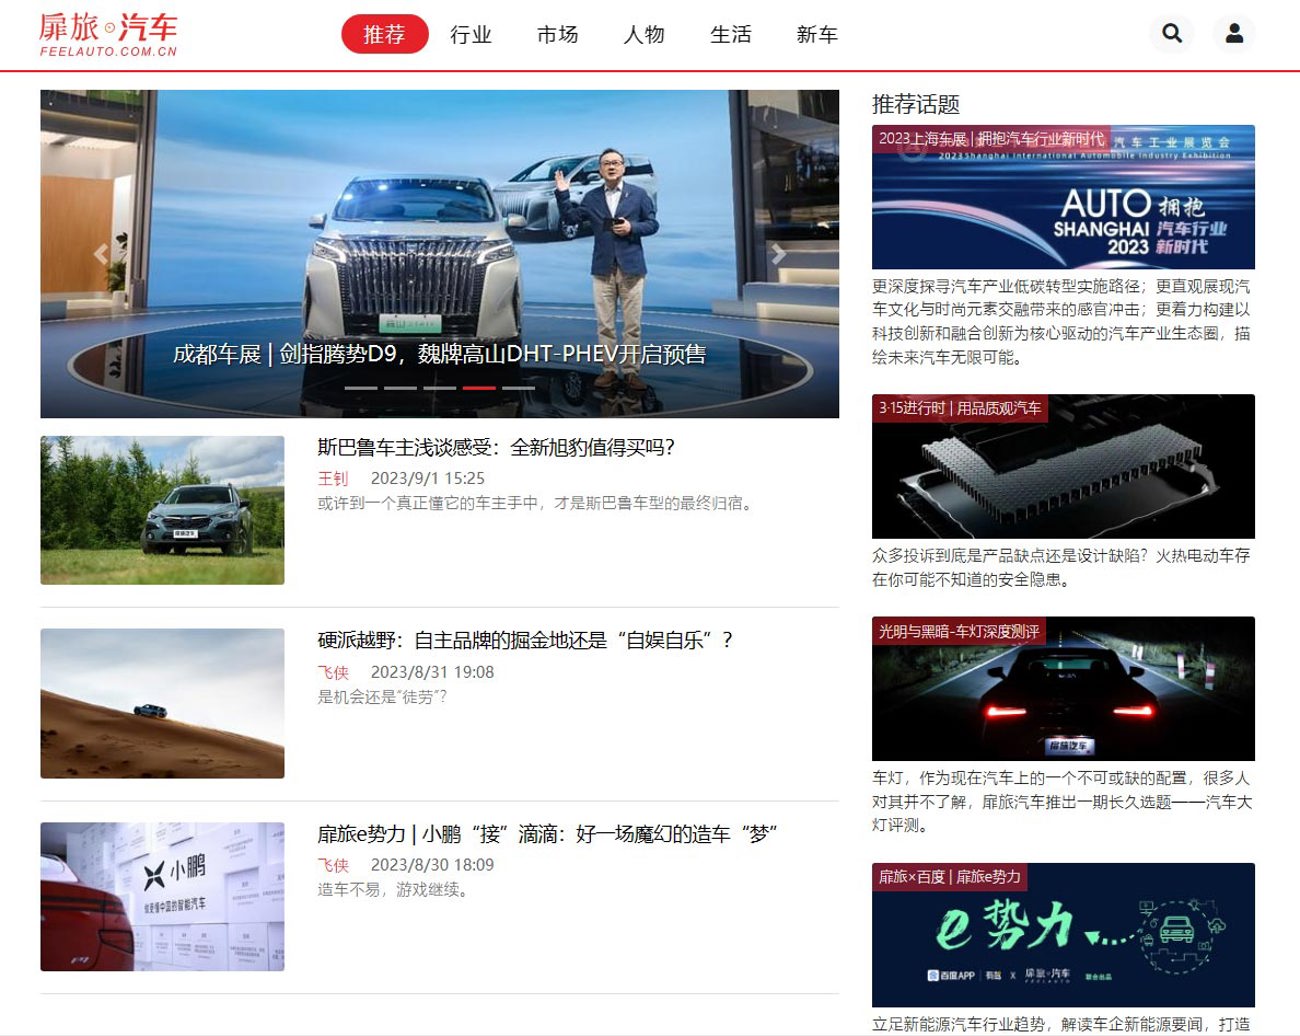 Beijing Feilv Culture and Technology's automotive lifestyle cutting-edge media